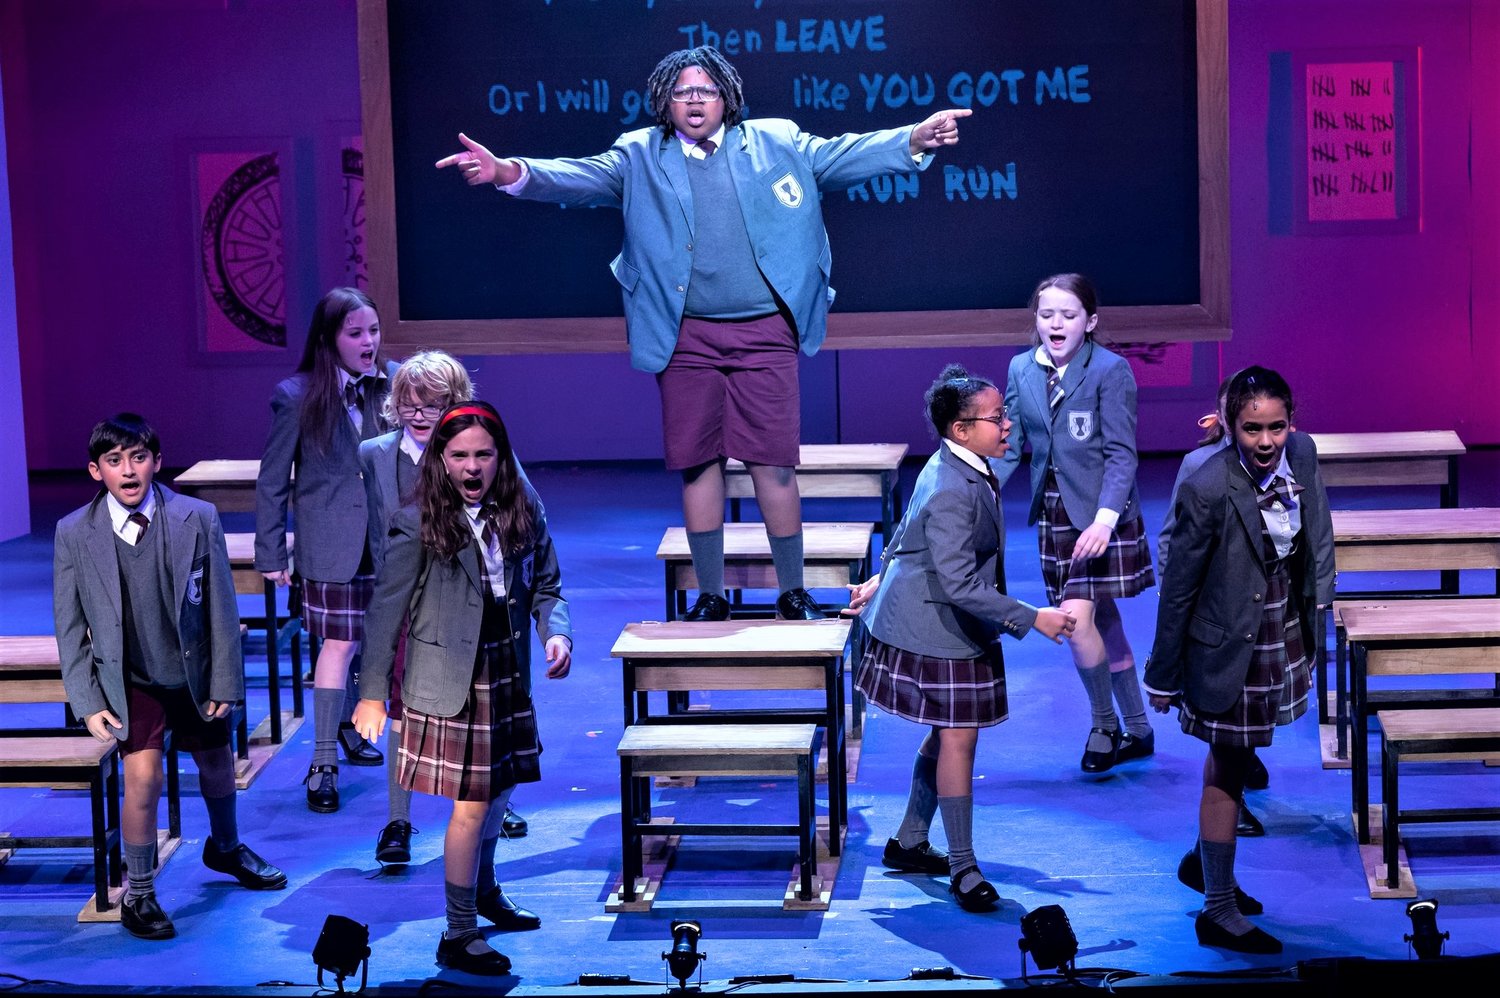 "Matilda the Musical" is the latest production from Cape Fear Regional Theatre. Performances run through Feb. 19.